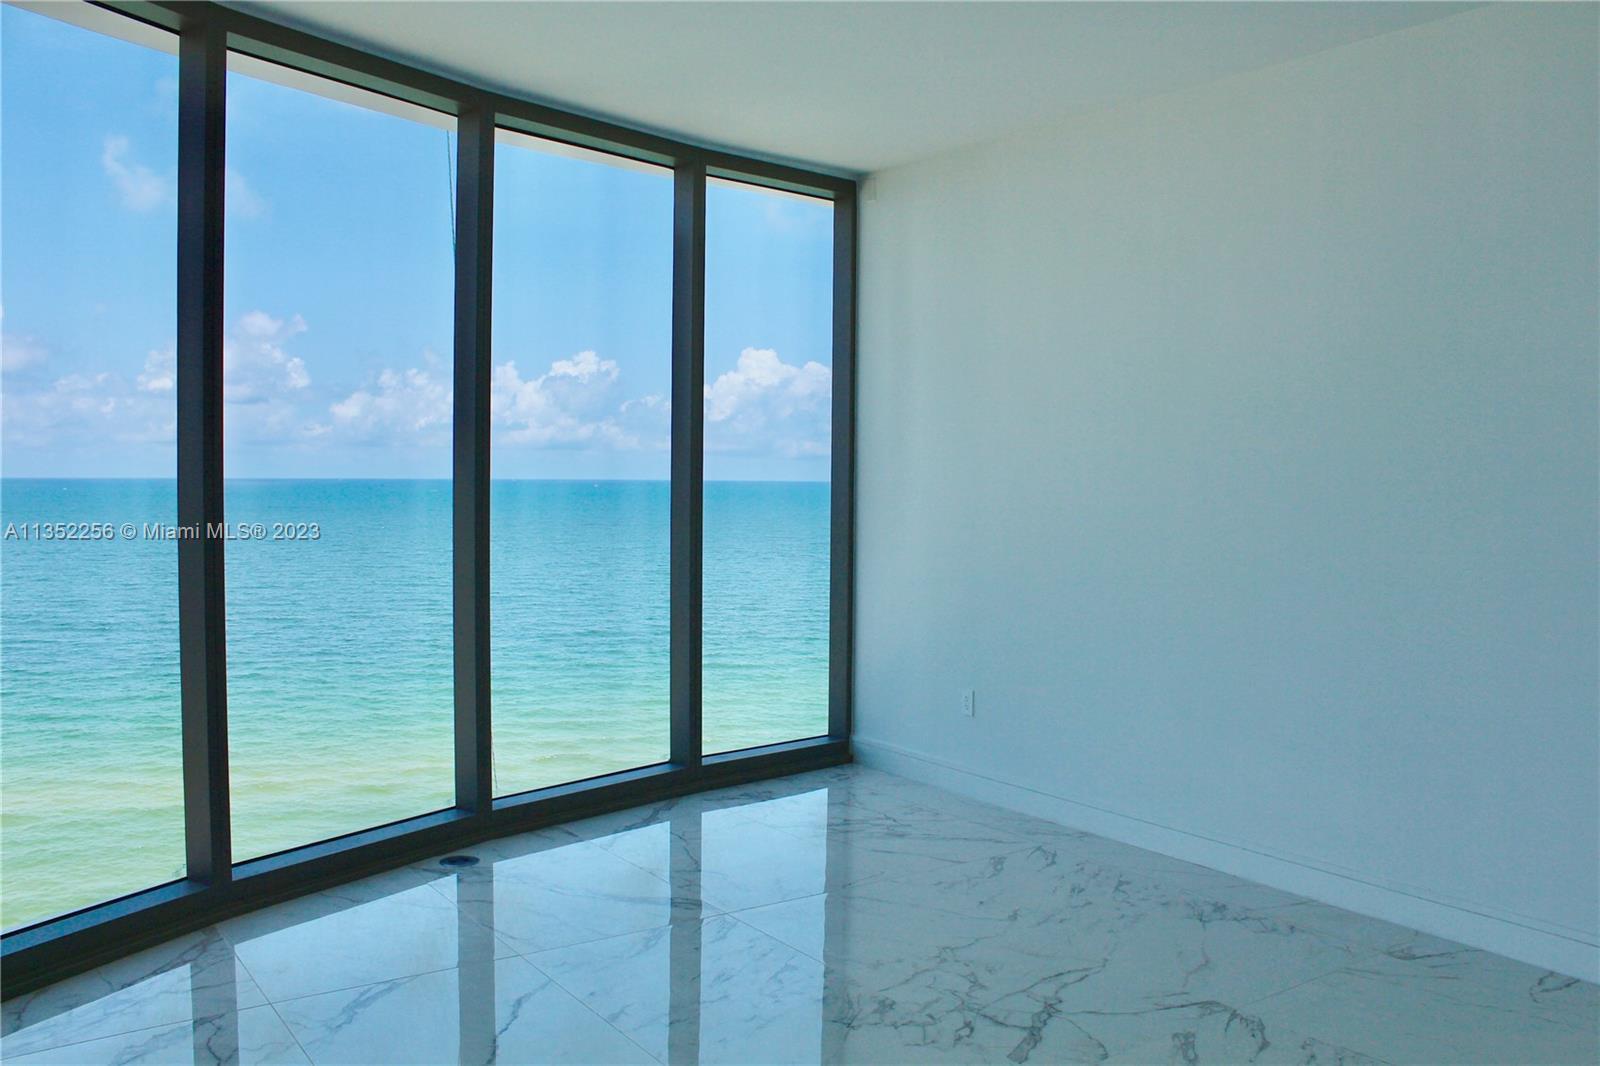 Live in the most desirable building in South Florida! Spectacular 3BDRM + DEN + SERVICE, 4.5 BATHROO